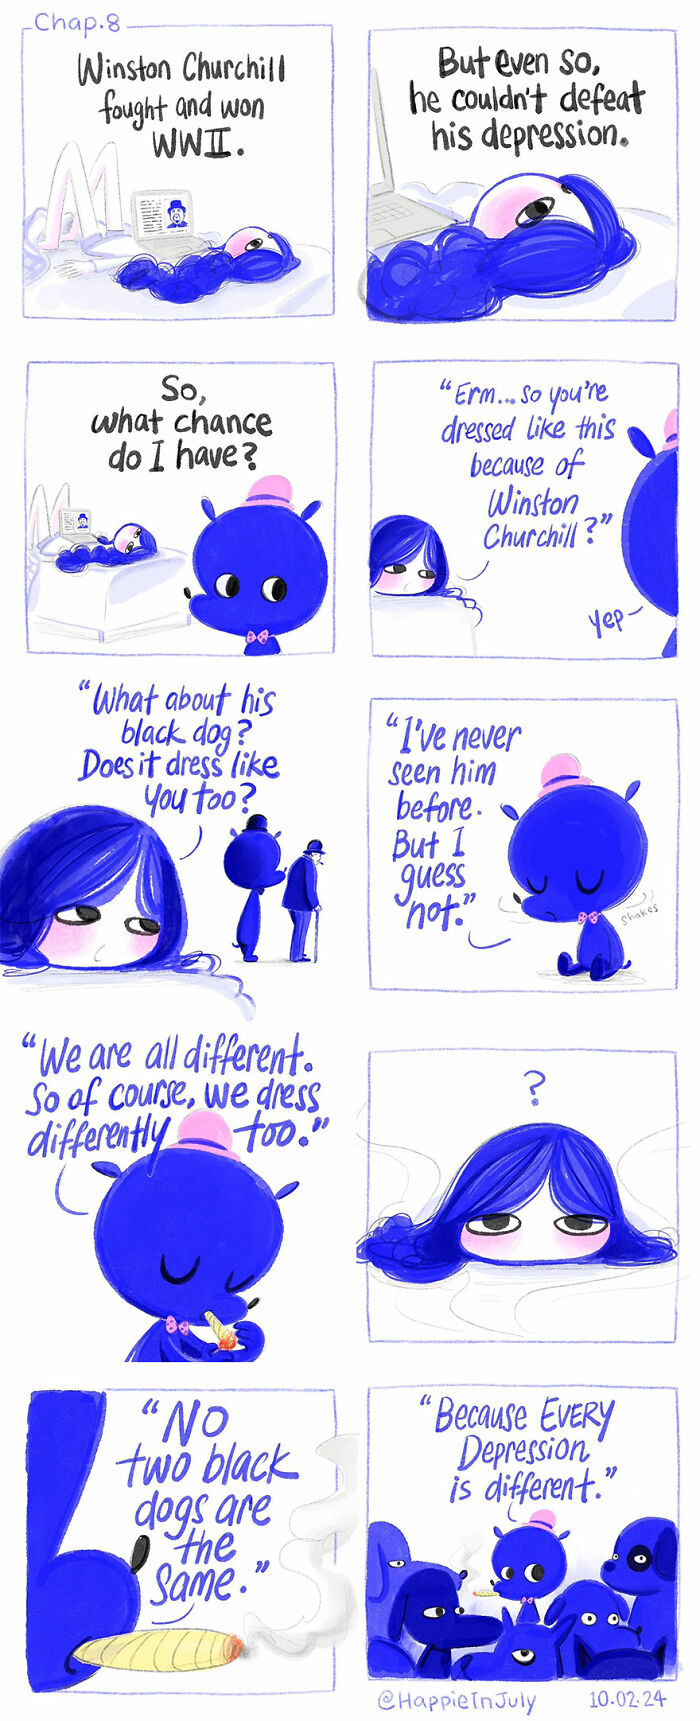 I Created A Webcomic About A Depression Named Happie And A Girl Named July, And How They Learn To Live With Each Other